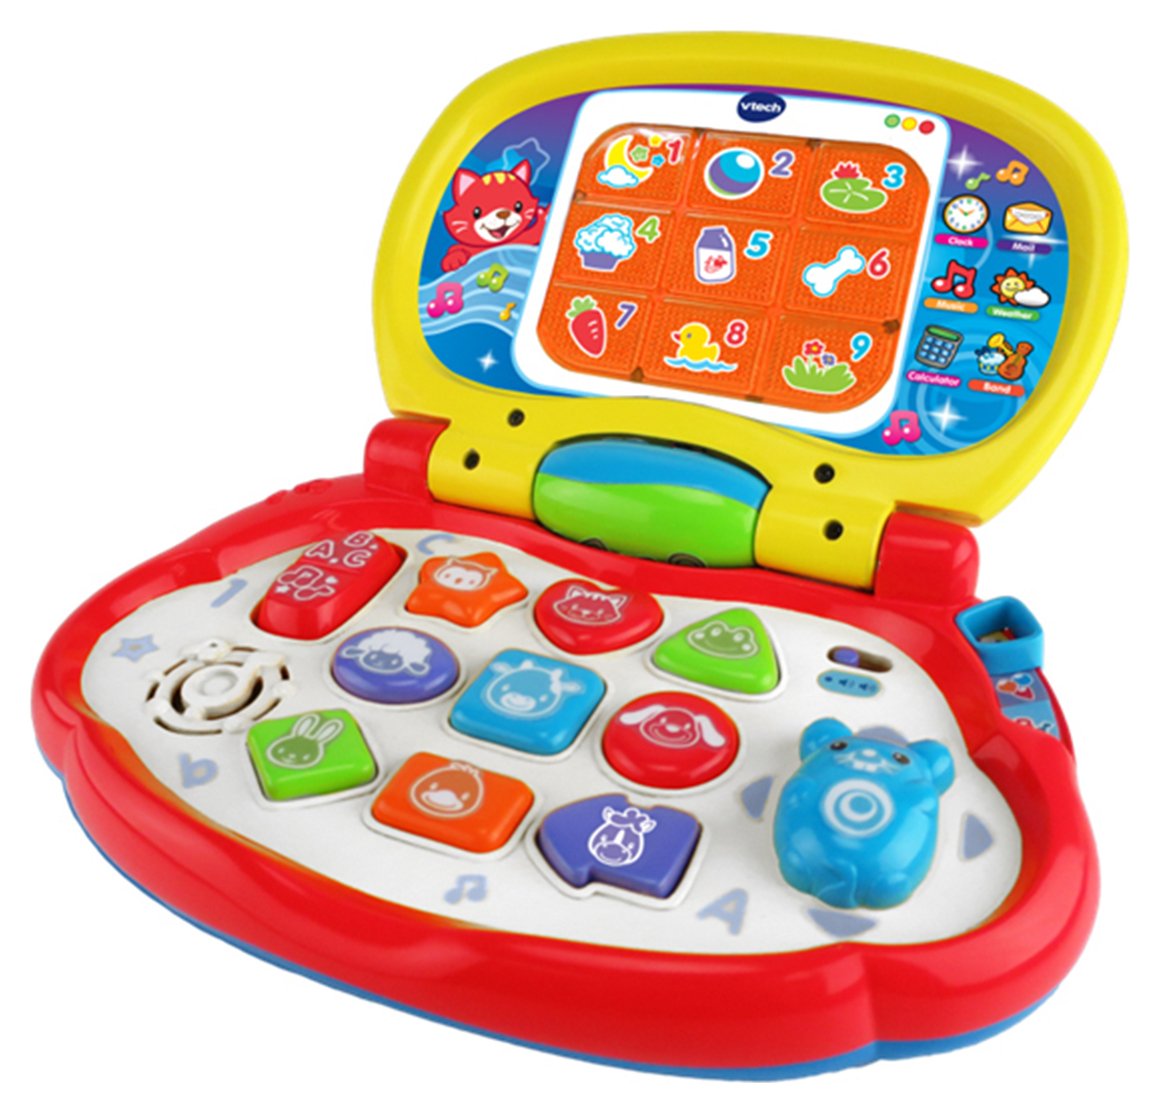 Vtech Baby's First Laptop